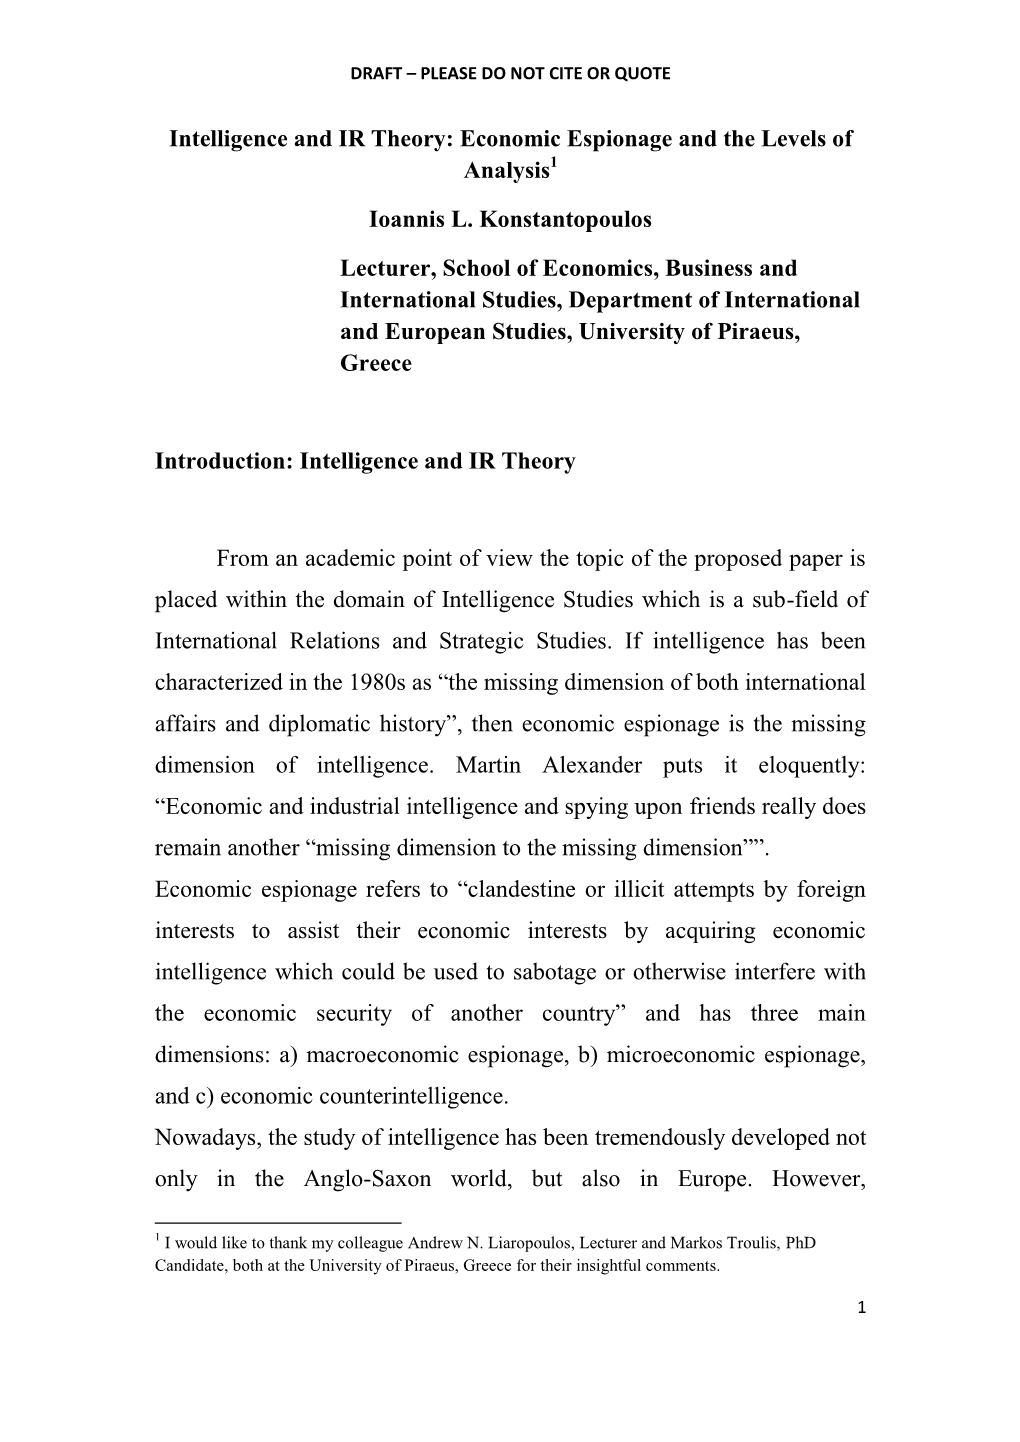 Intelligence and IR Theory: Economic Espionage and the Levels of Analysis1